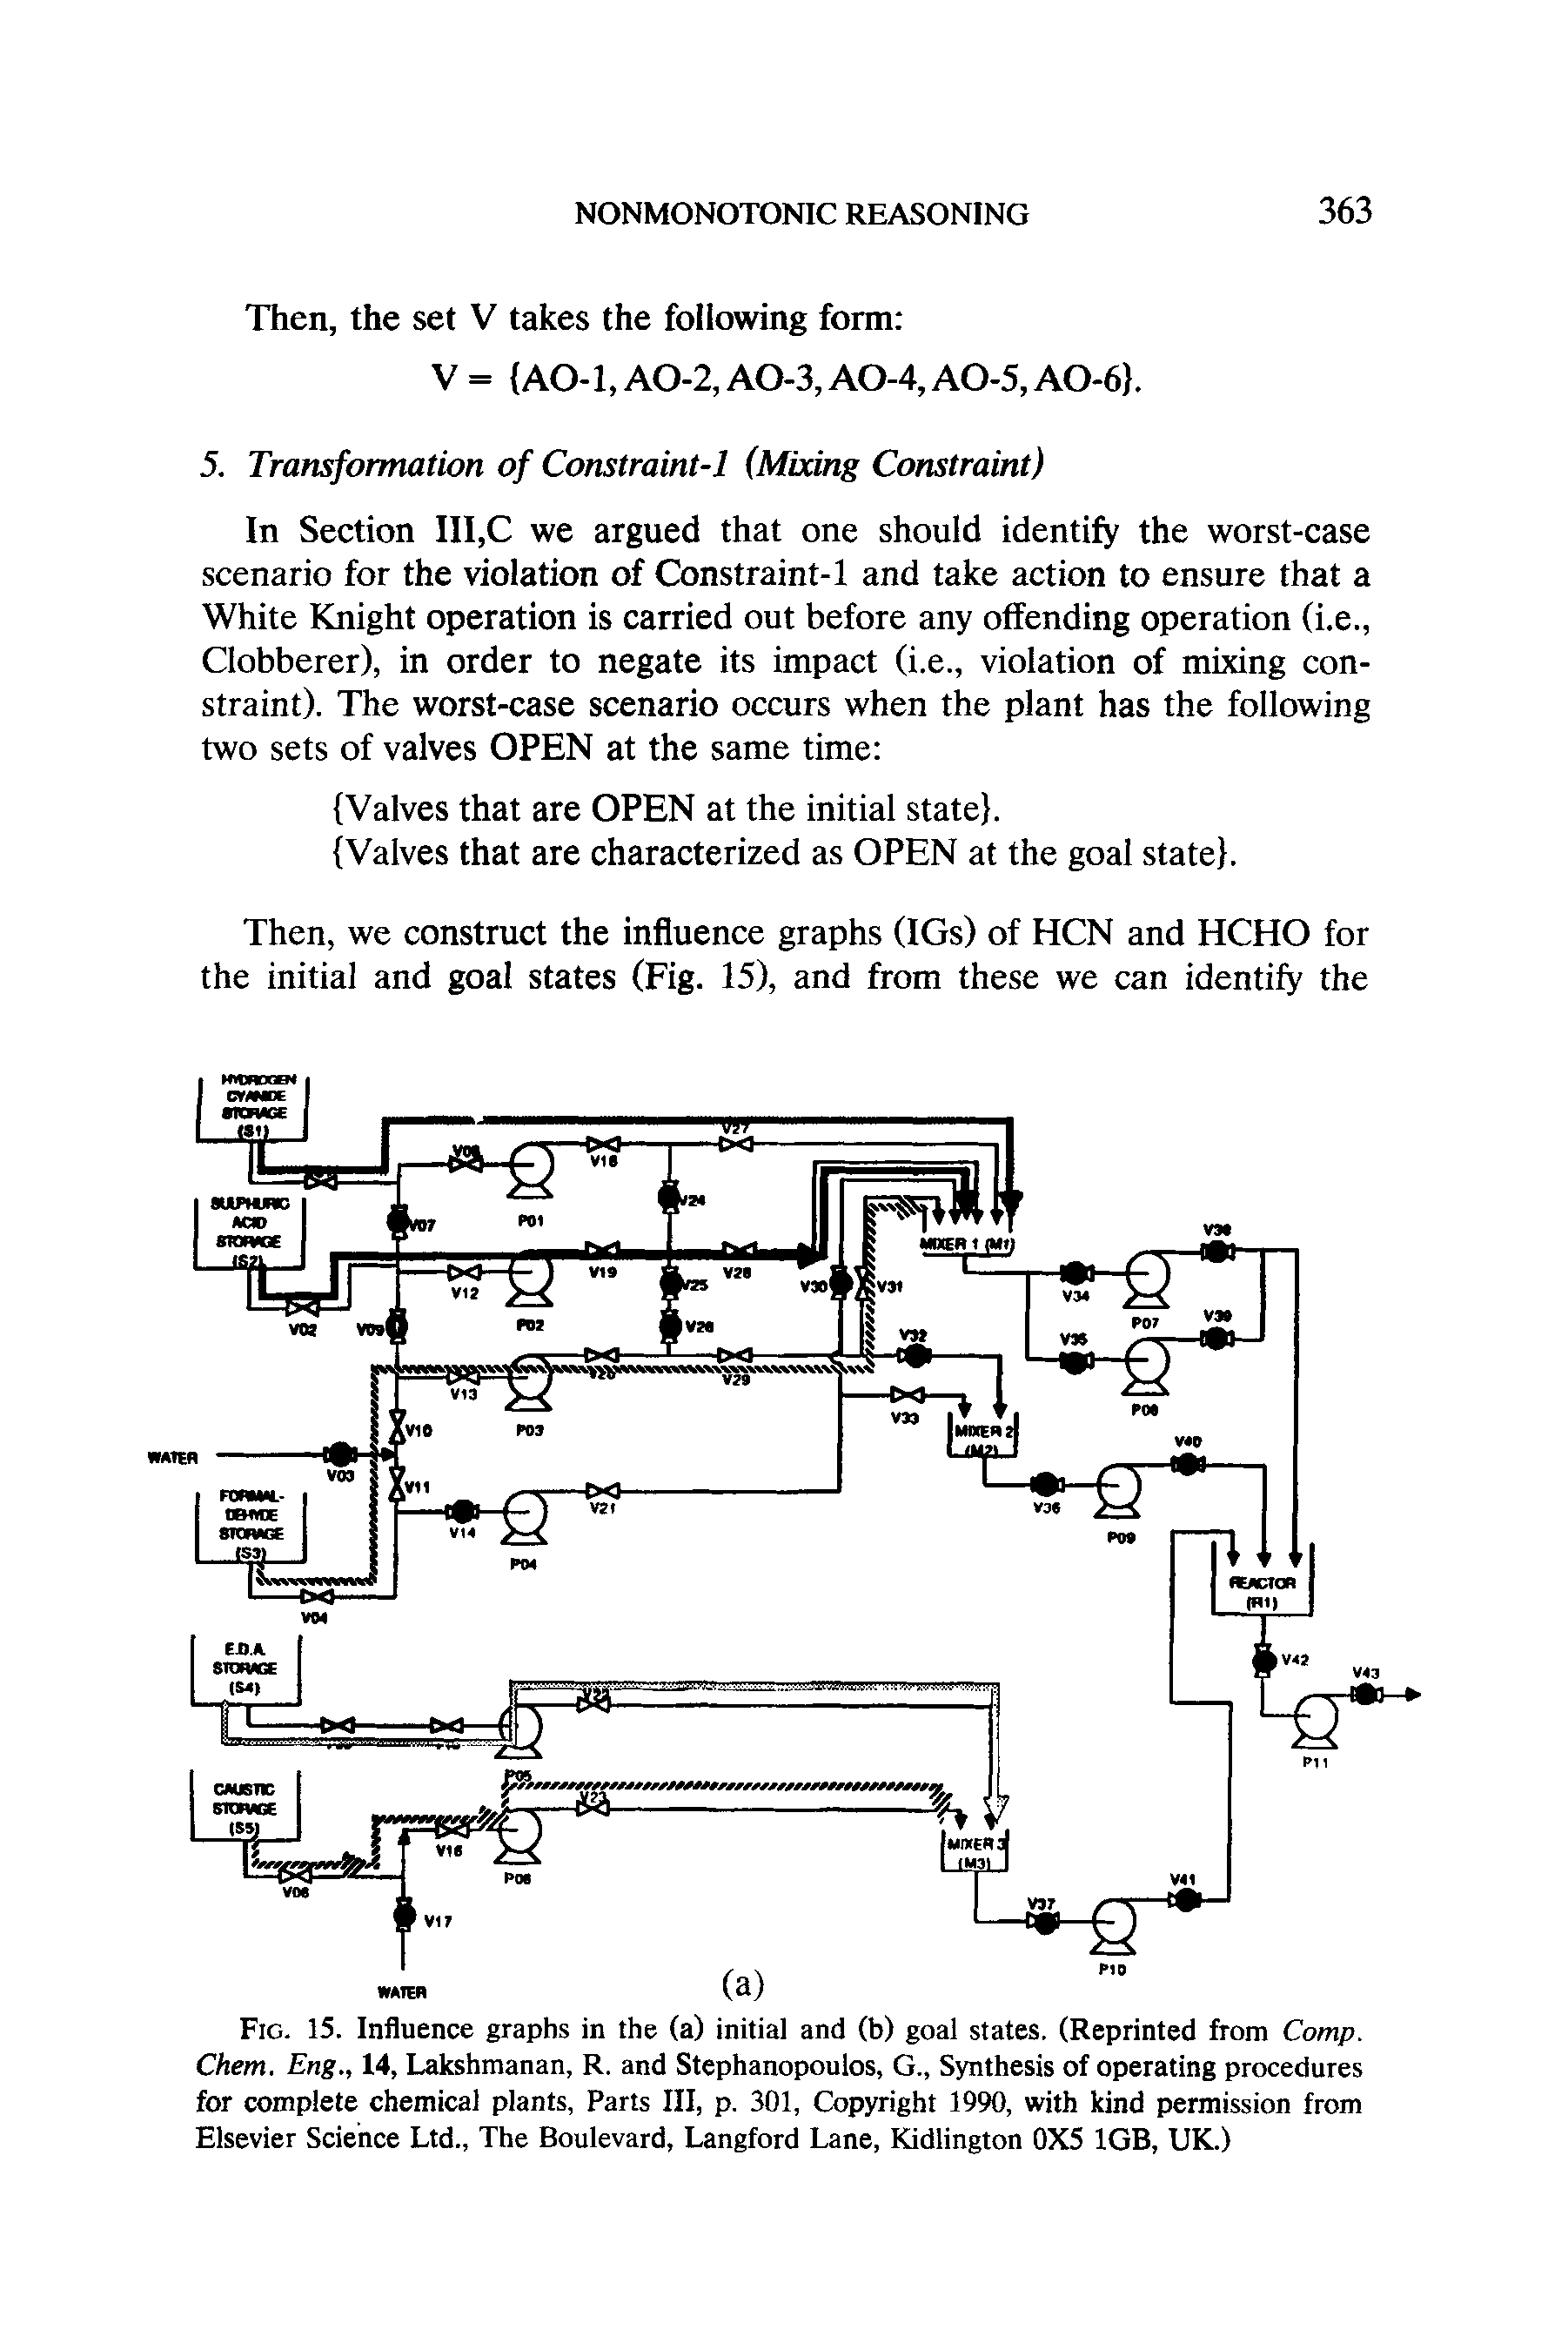 Fig. 15. Influence graphs in the (a) initial and (b) goal states, (Reprinted from Comp. Chem. Eng., 14, Lakshmanan, R. and Stephanopoulos, G., Synthesis of operating procedures for complete chemical plants, Parts III, p. 301, Copyright 1990, with kind permission from Elsevier Science Ltd., The Boulevard, Langford Lane, Kidlington 0X5 1GB, UK.)...